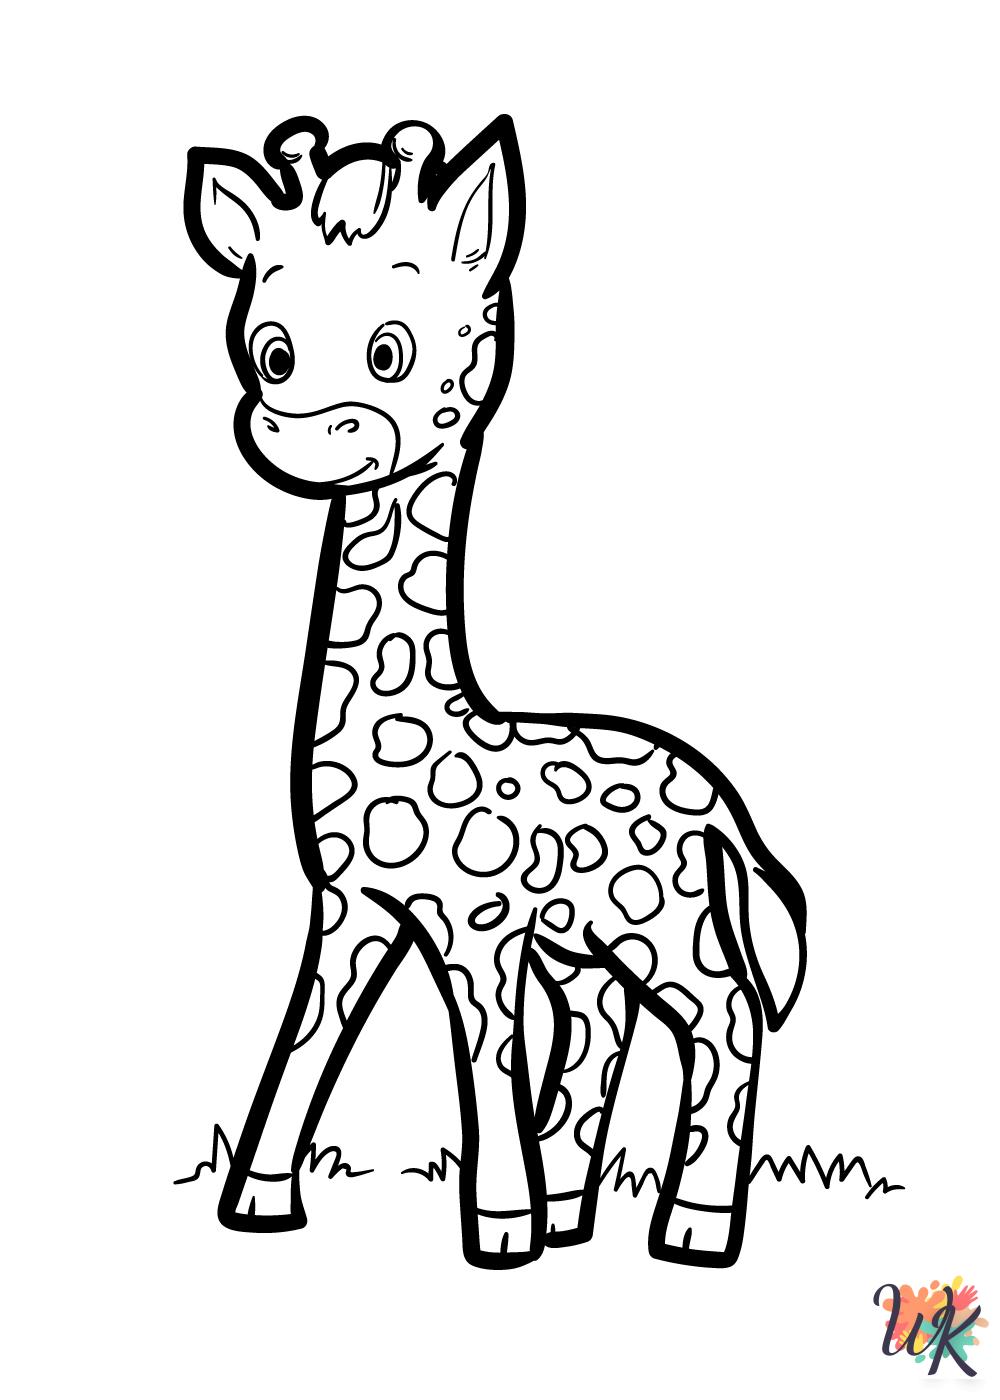 Giraffe free coloring pages